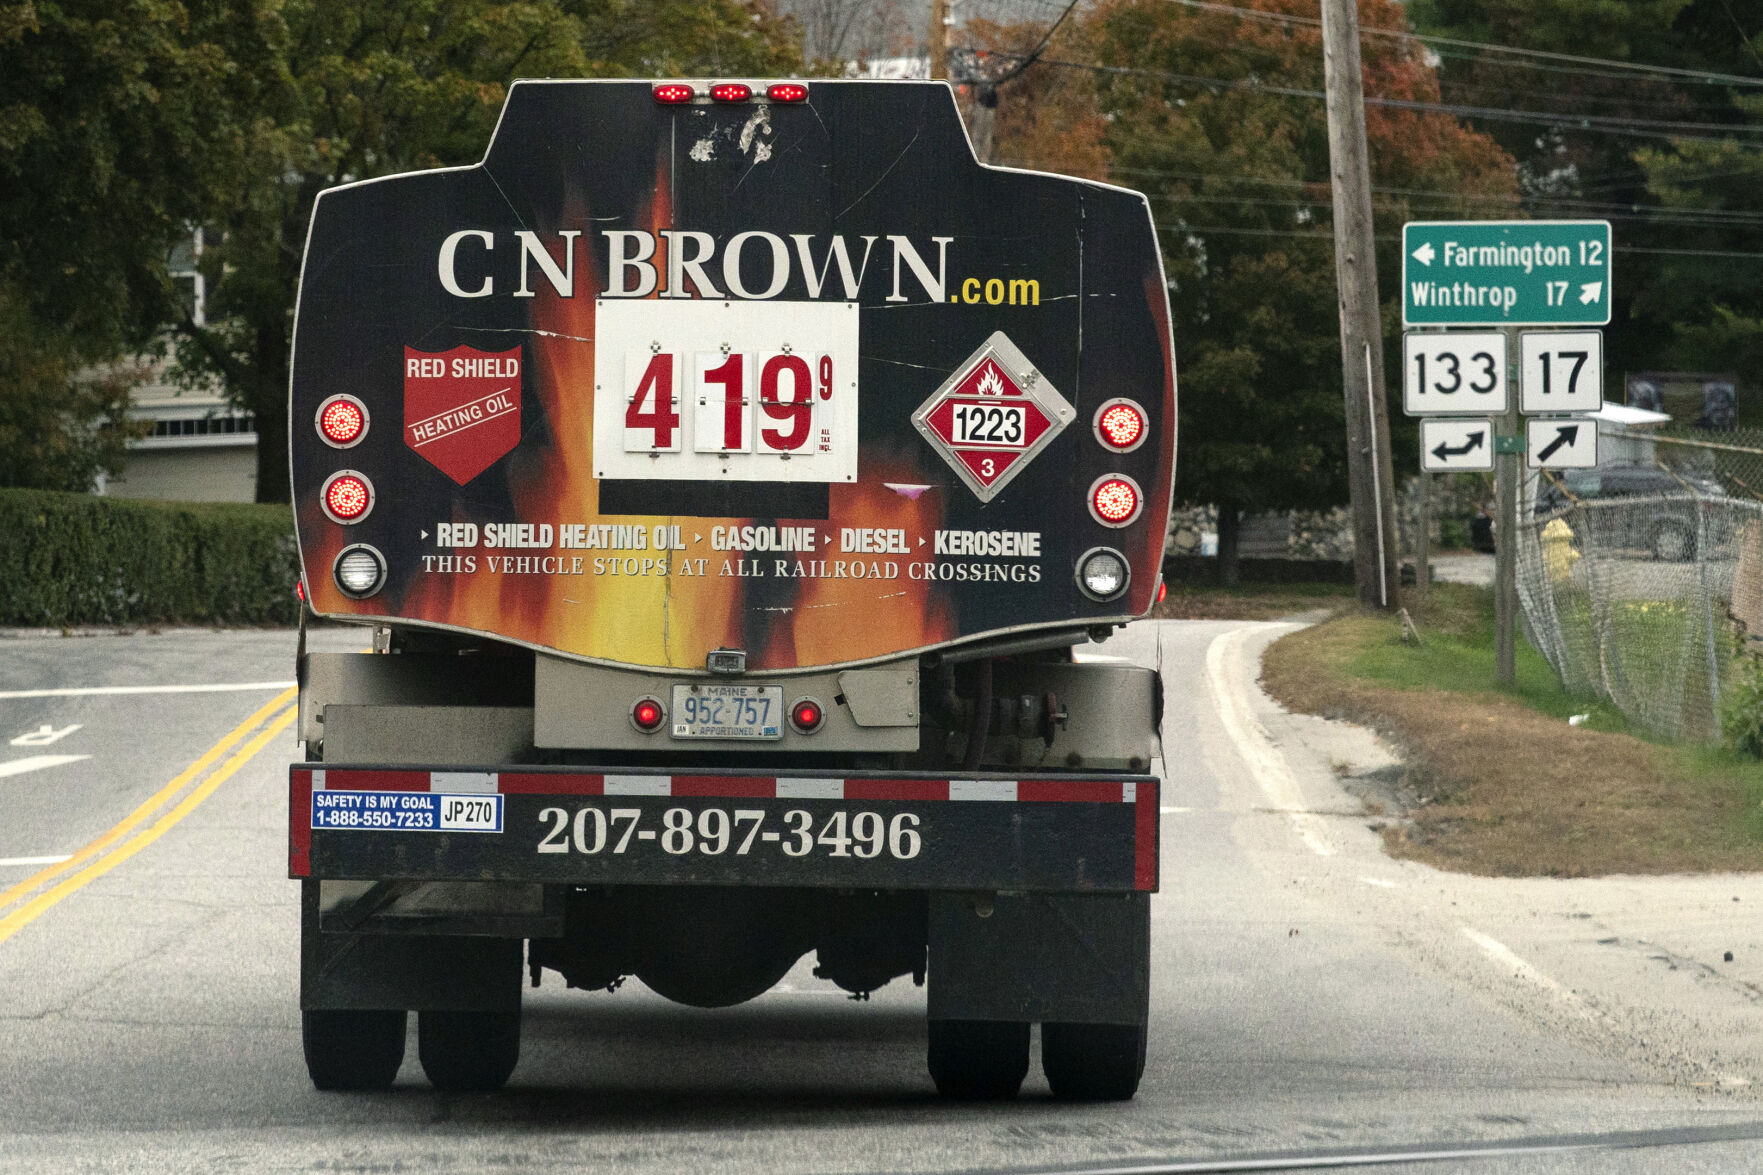 <p>FILE - A fuel delivery truck advertises its price for a gallon of heating oil, Oct. 5, 2022 in Livermore Falls, Maine. The Biden administration said Wednesday it would make $4.5 billion available to help lower heating costs this winter through a low-income home energy assistance program. The funds will go to heating and utility bill costs, and will also be available to help families make home energy repairs aimed at lowering costs, the White House said. (AP Photo/Robert F. Bukaty, File)</p>   PHOTO CREDIT: Robert F. Bukaty - staff, AP